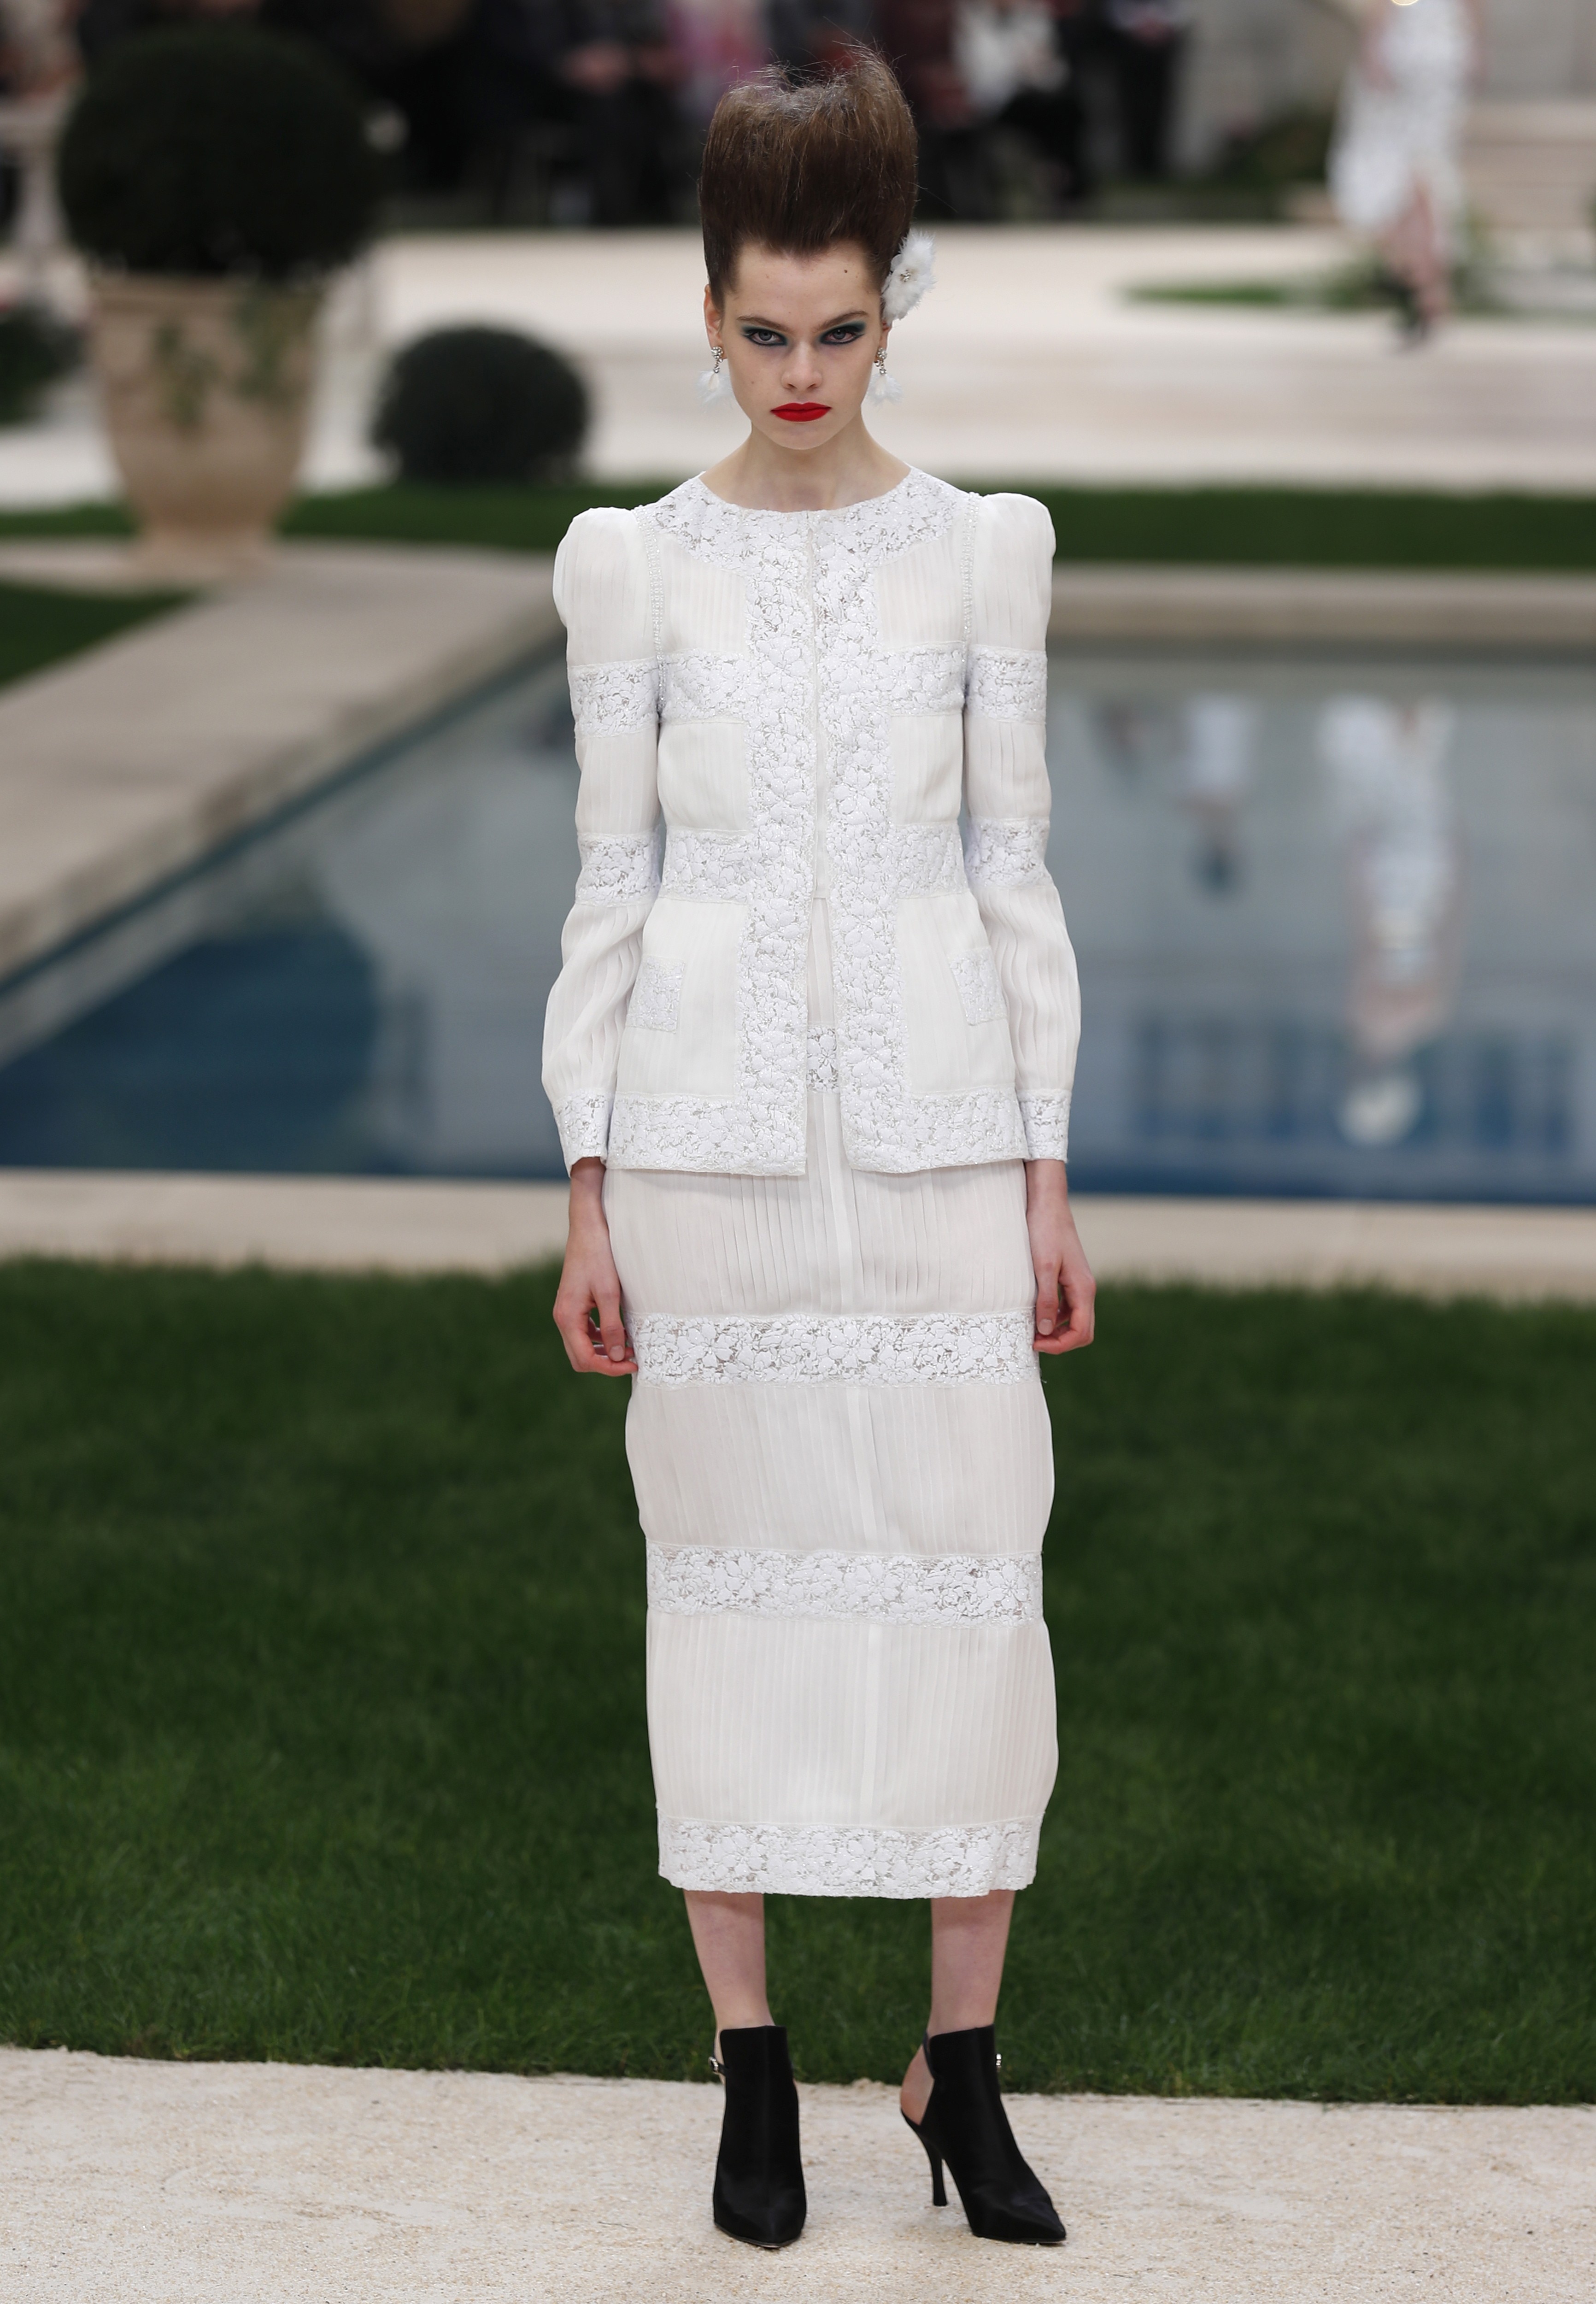 Karl Lagerfeld Missed Chanel's Haute Couture Fashion Show